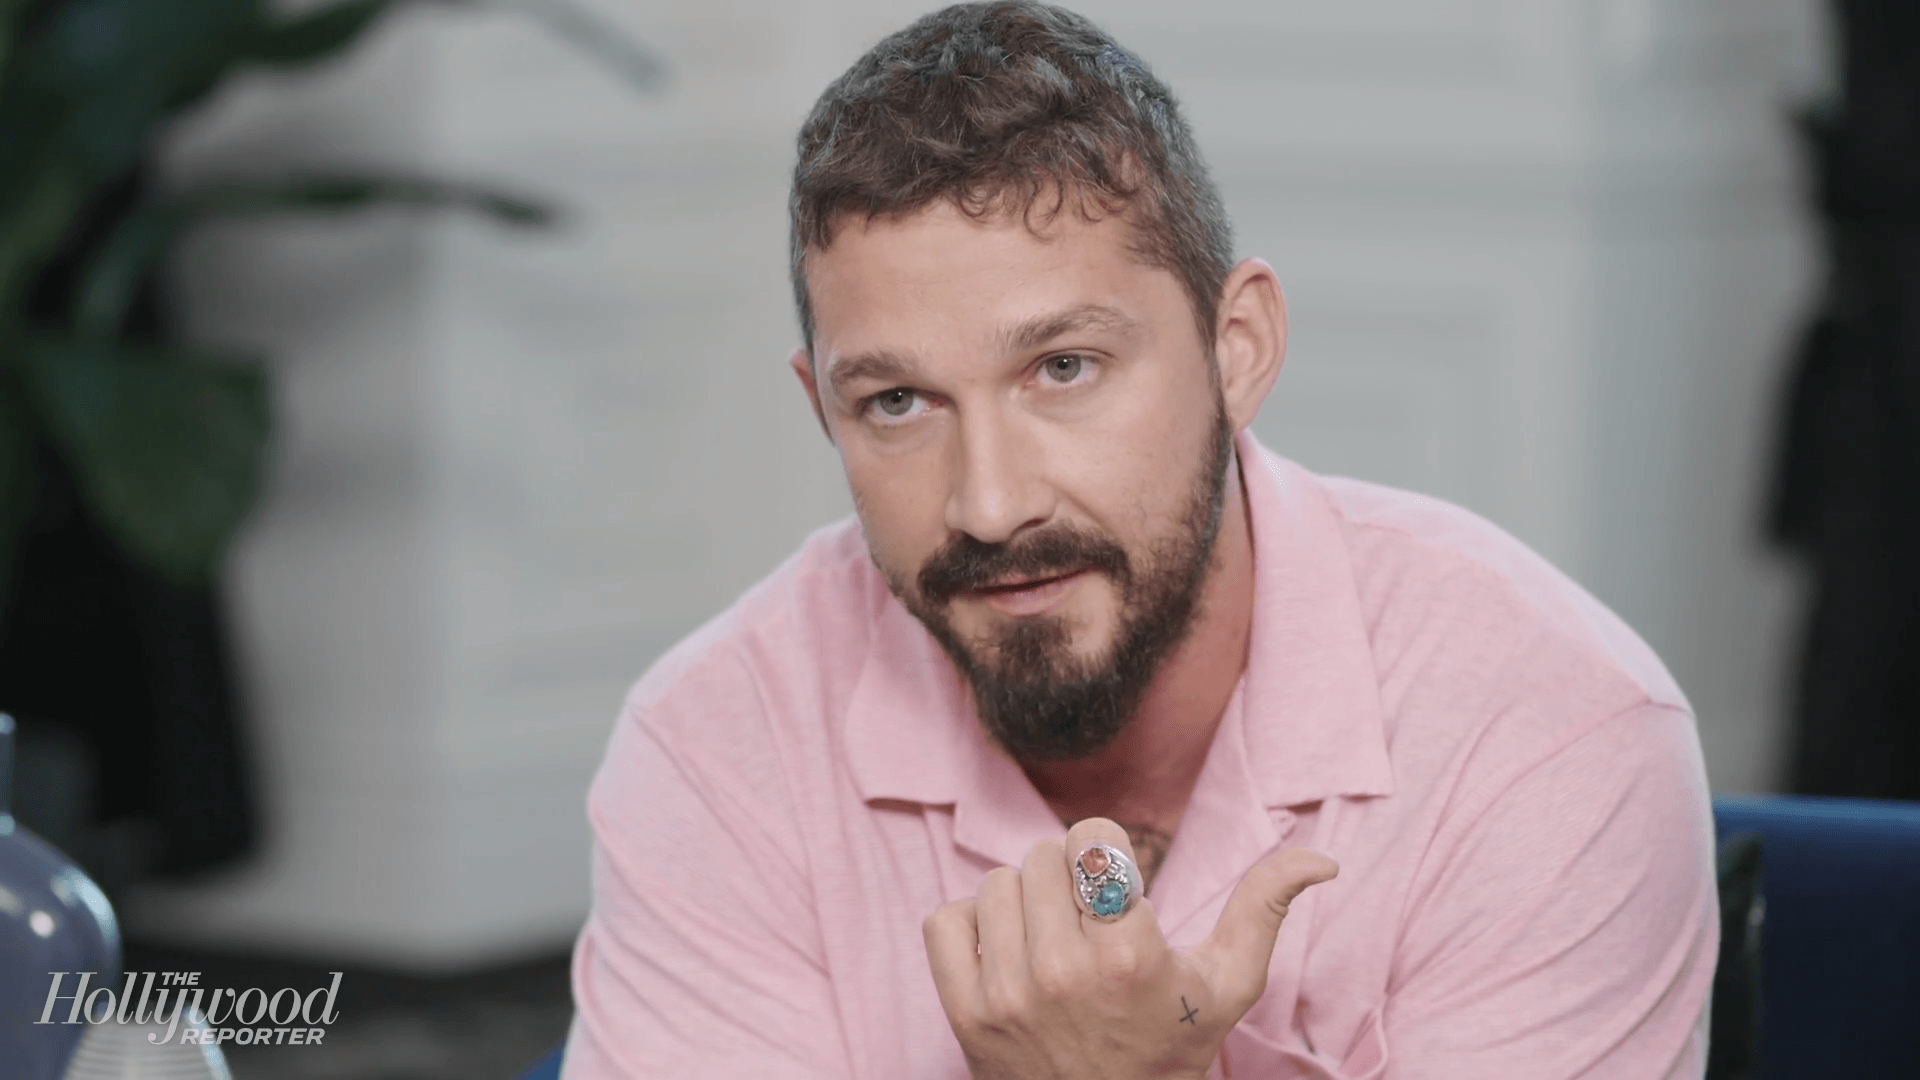 Shia LaBeouf on Playing His Father, Noah Jupe and Lucas